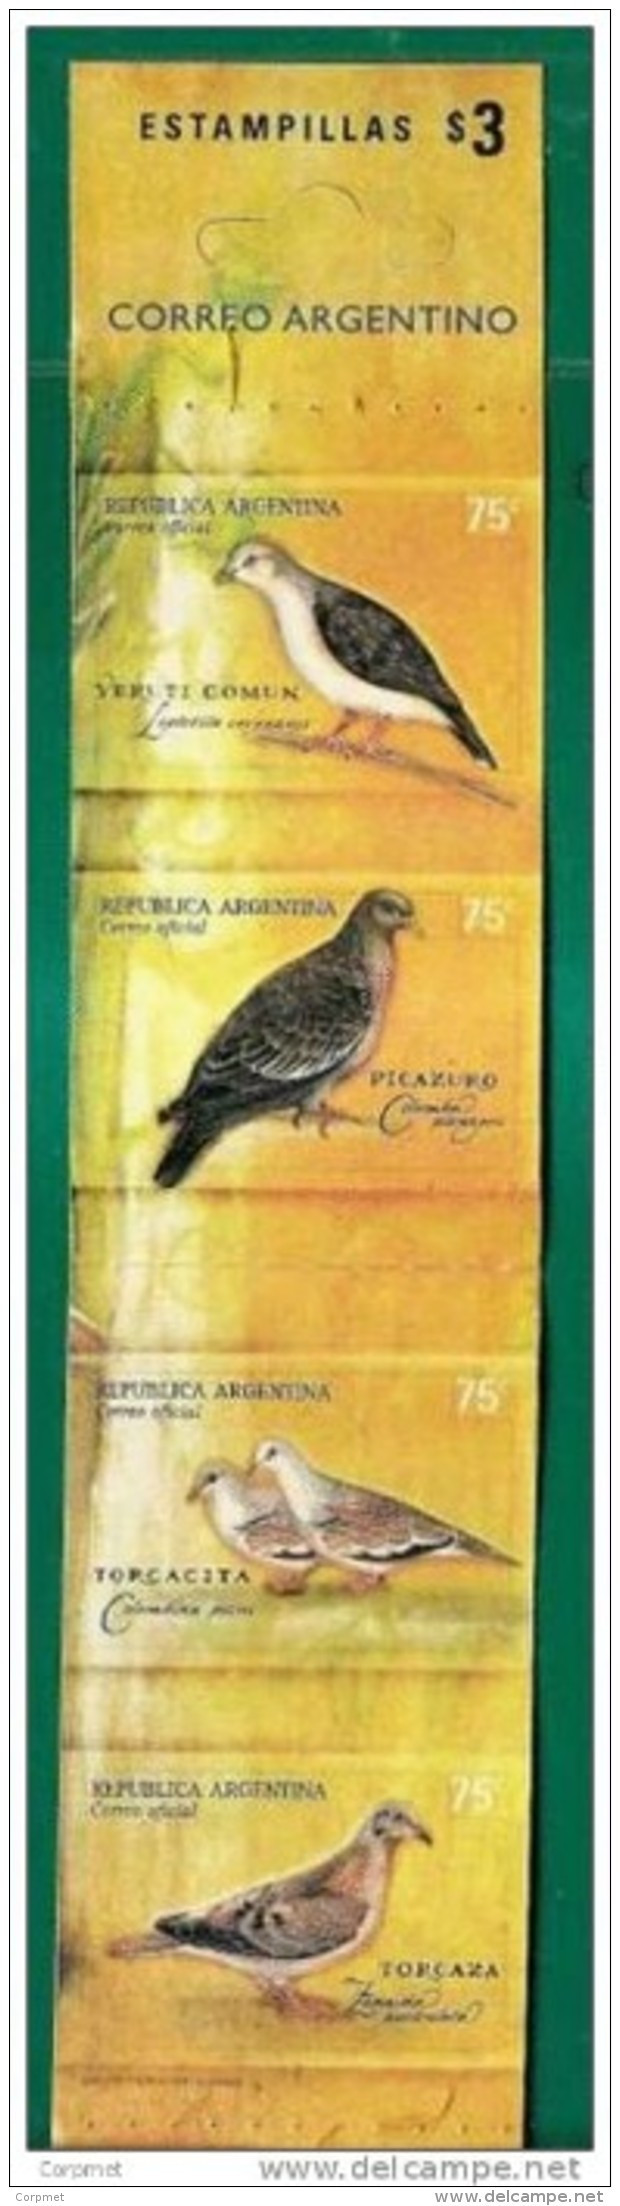 DOVE - COLOMBE - PALOMAS - VF ARGENTINA Autoadhesive 2000 CARNET - BOOKLET - 4 STAMPS - # 3031 - Libretti